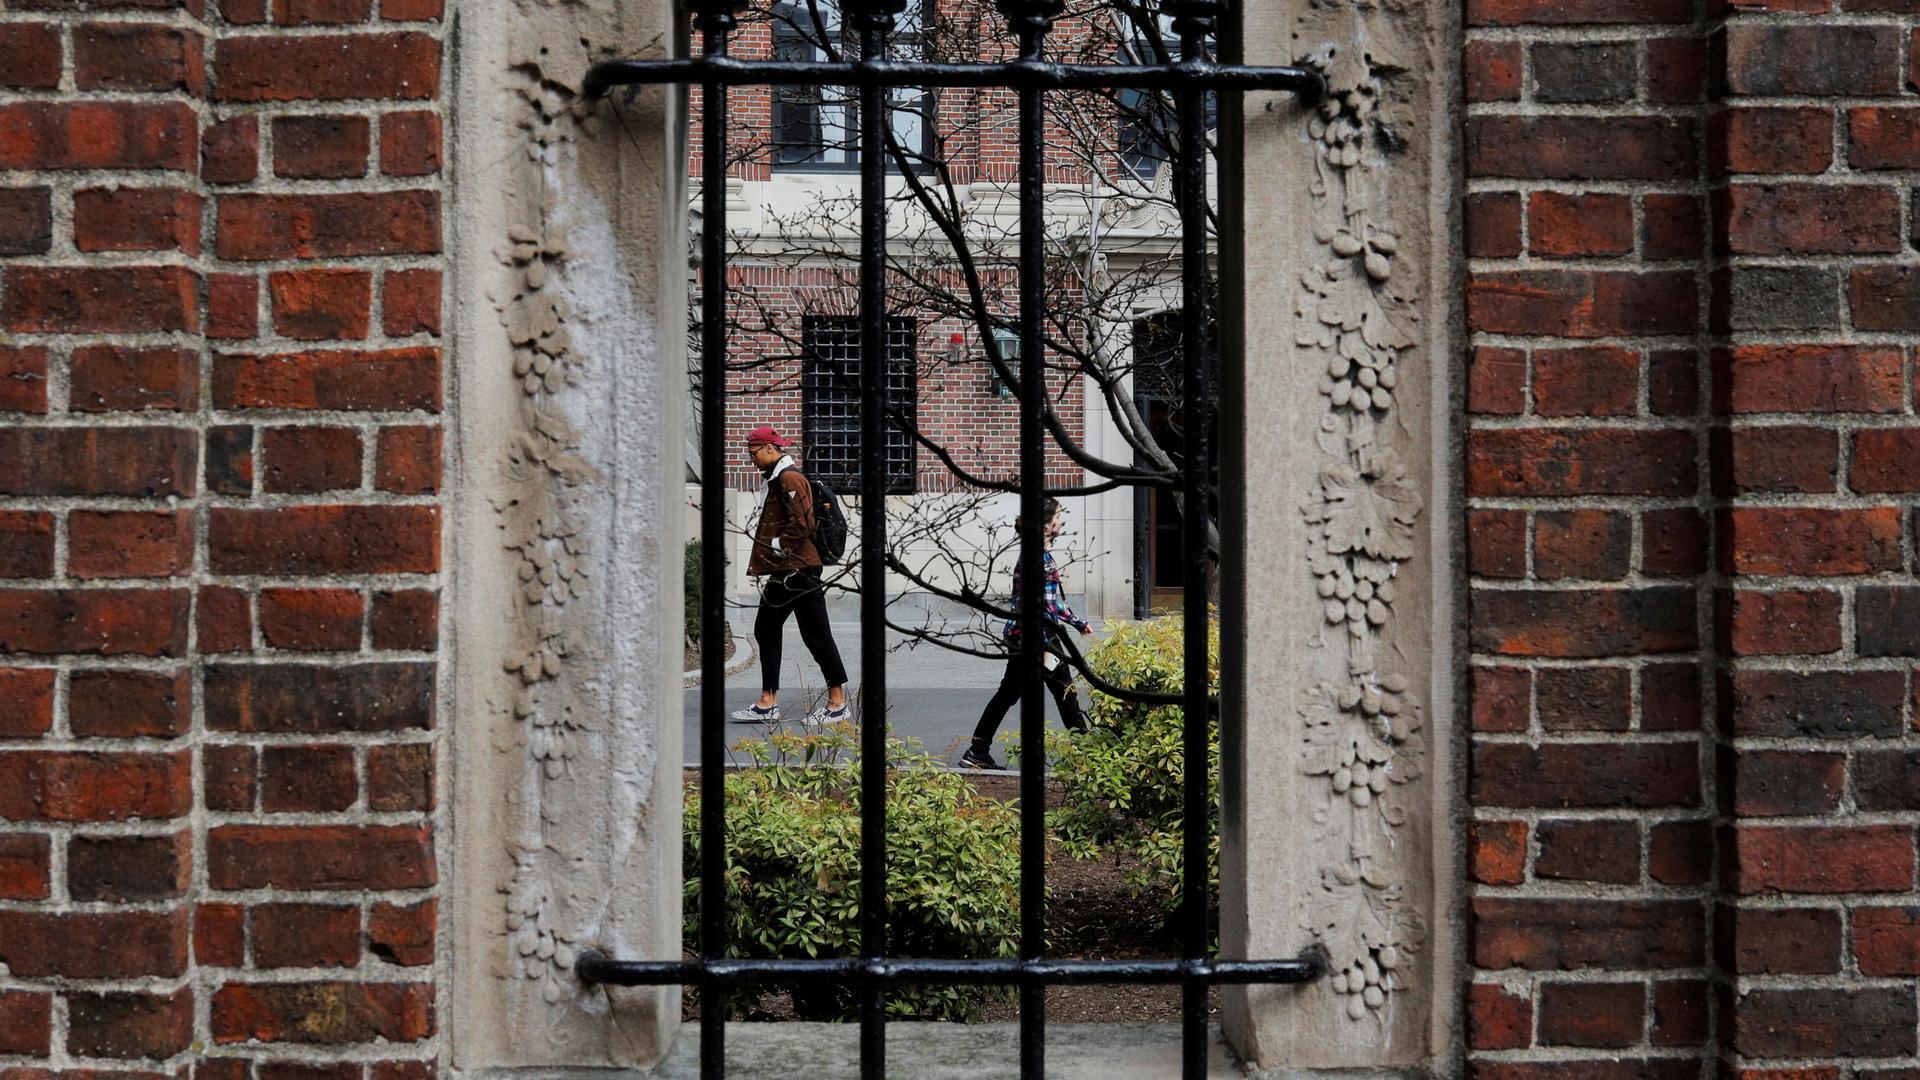 Several people are shown through a stone window with metal bars on it walking.